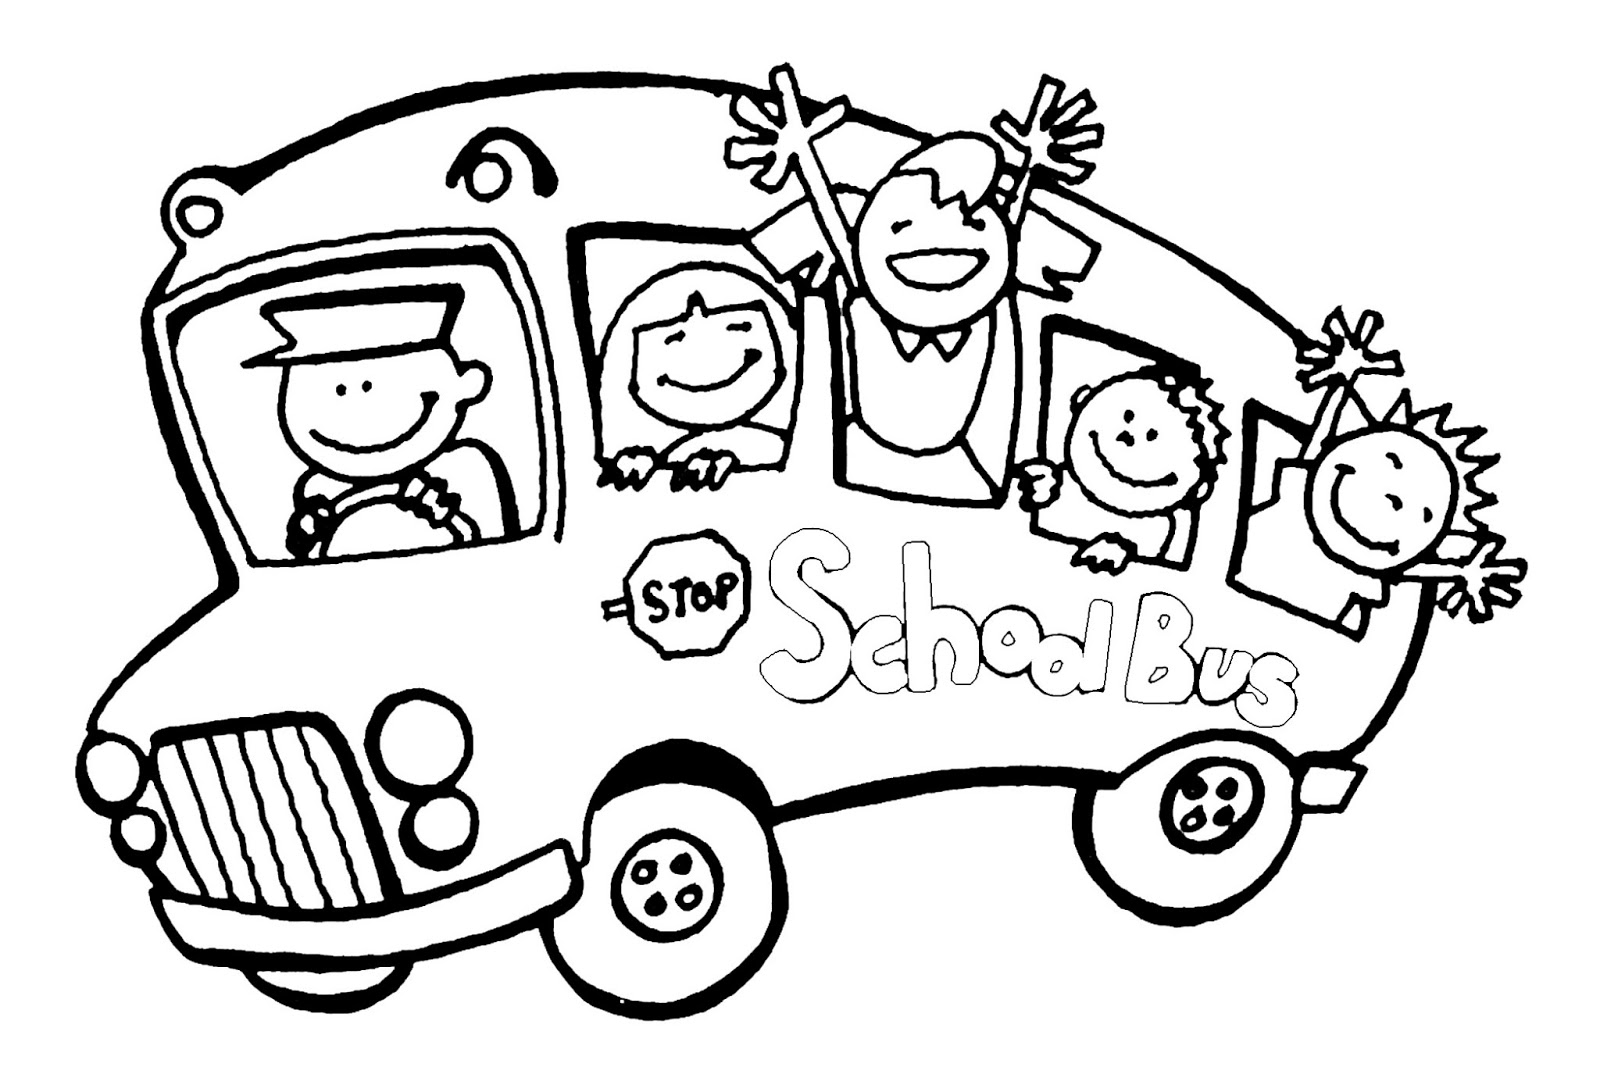 Bus Coloring Pages